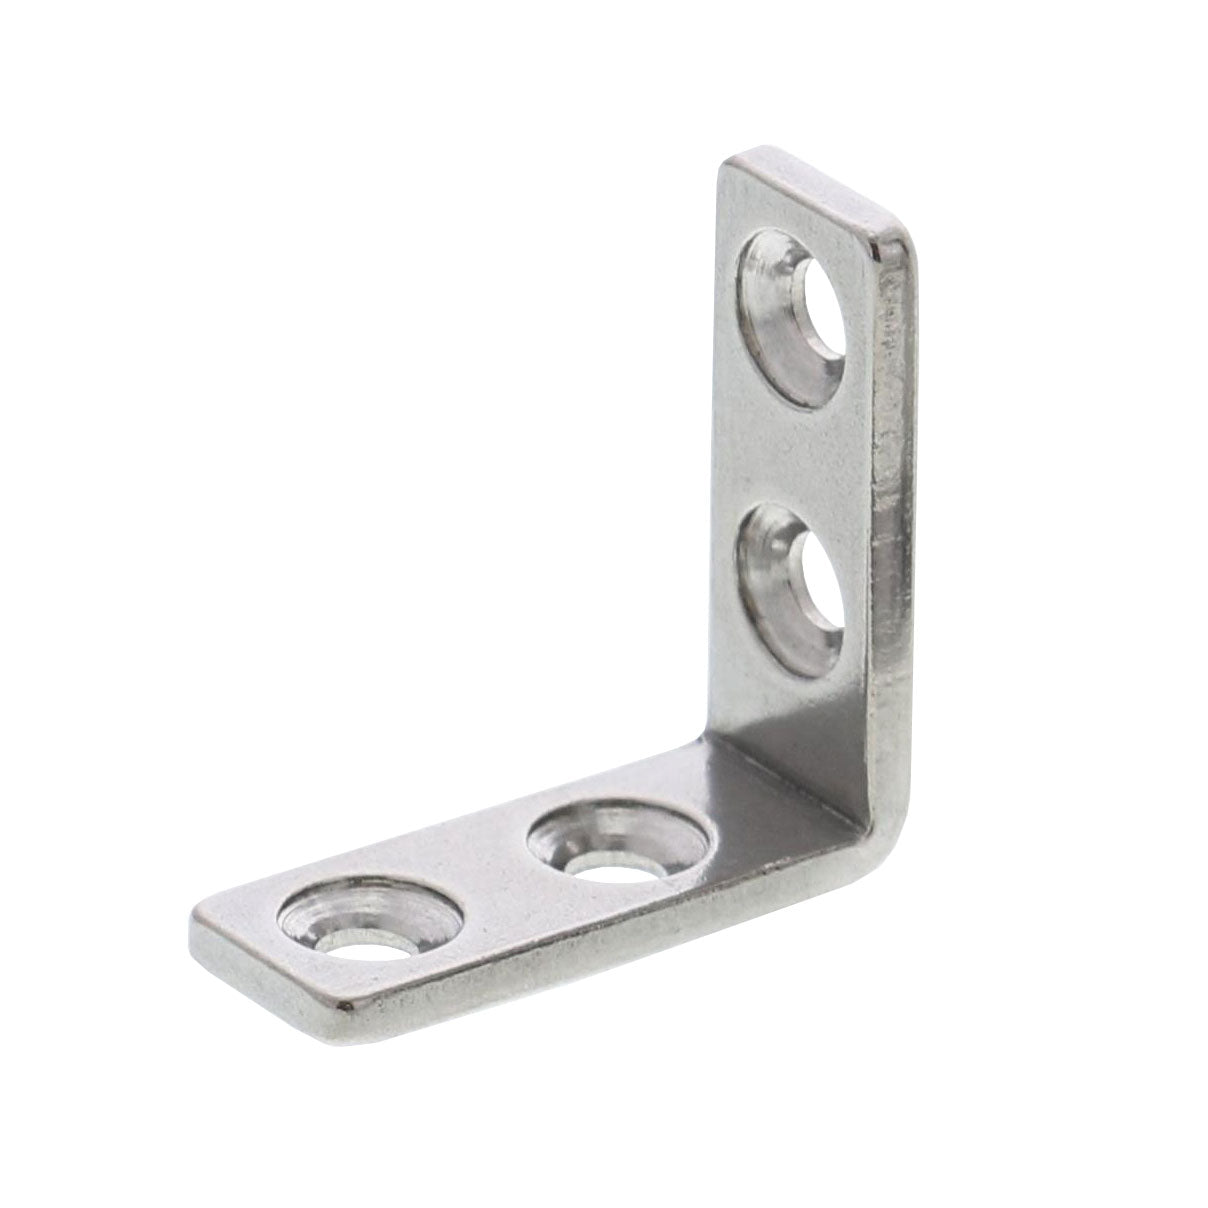 31mm Stainless Steel Angle Bracket